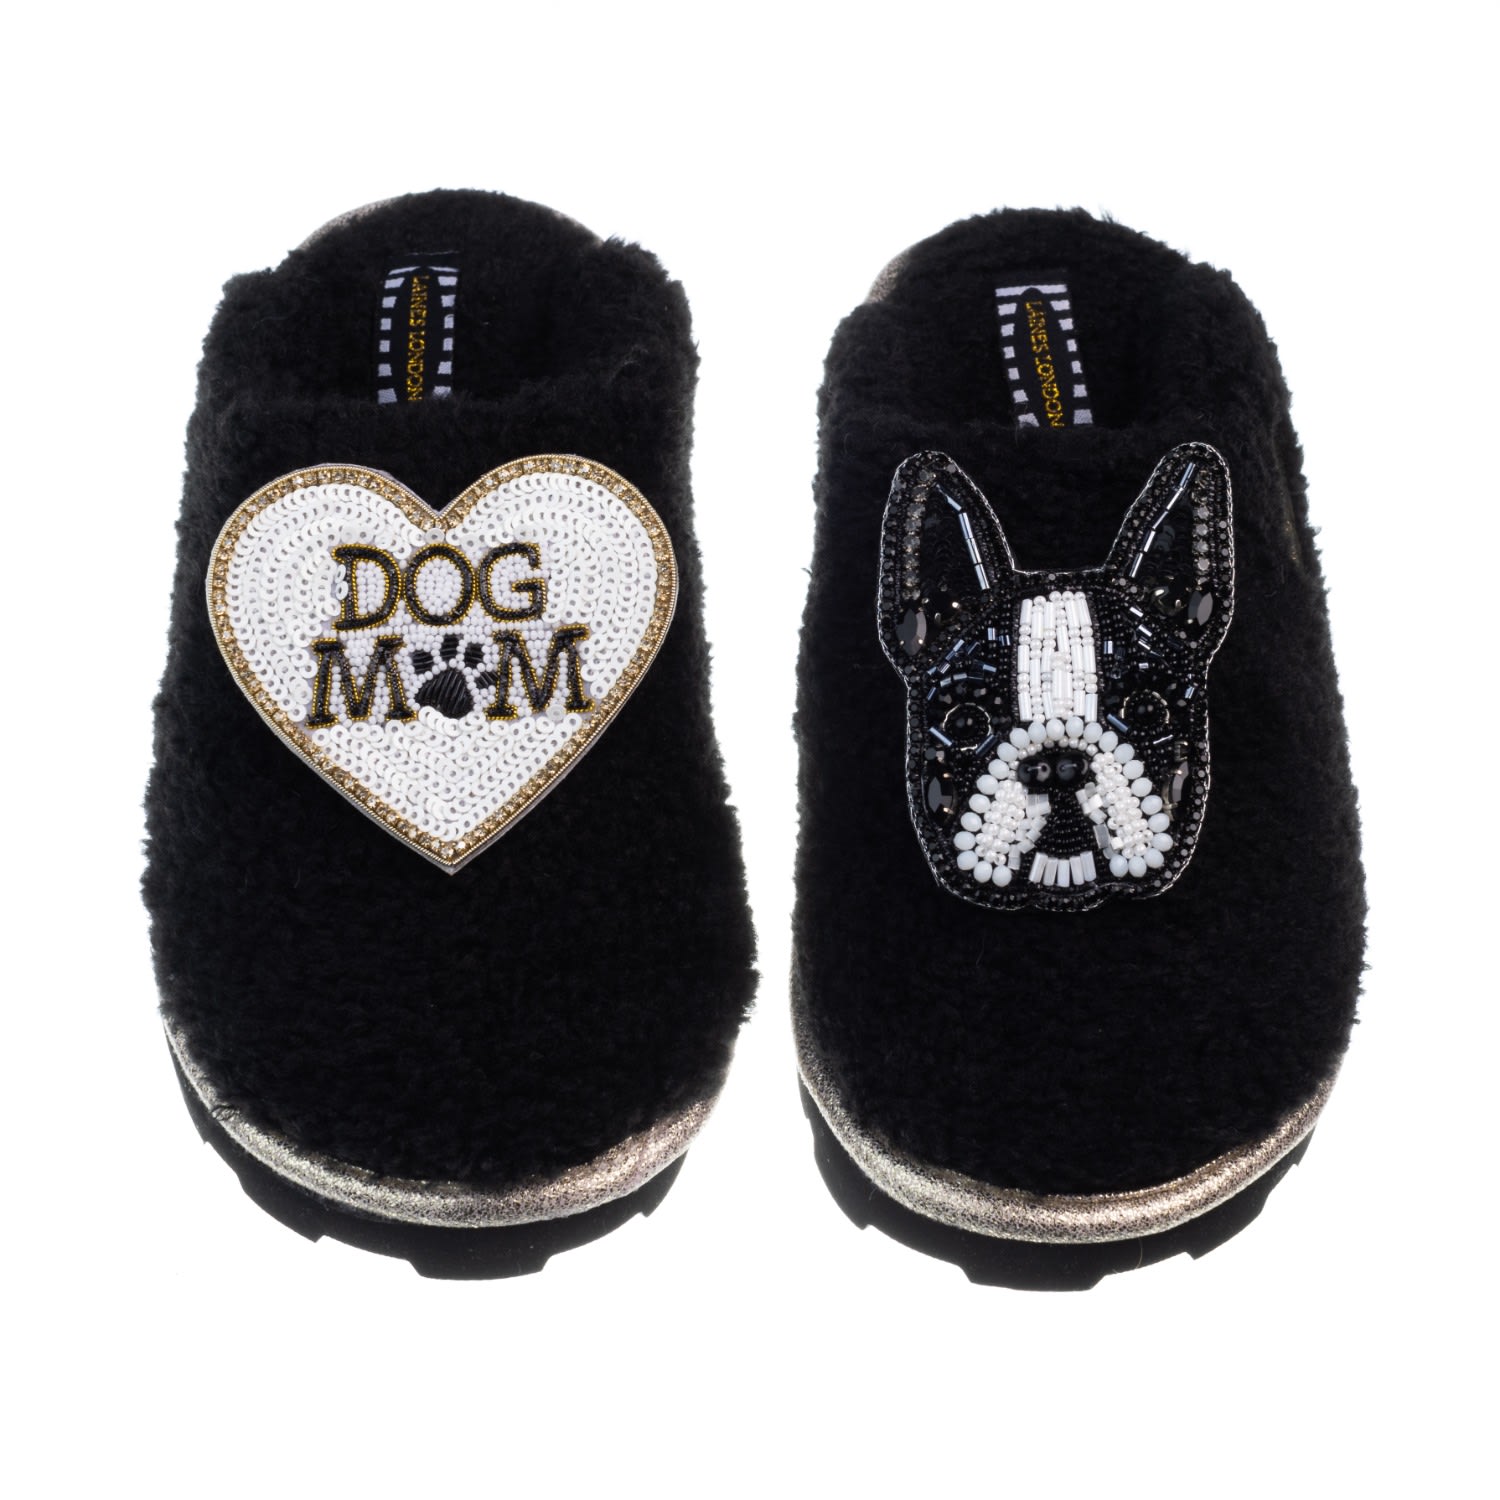 Women’s Teddy Closed Toe Slippers With Buddy The Boston Terrier & Dog Mum / Mom Brooches - Black Medium Laines London